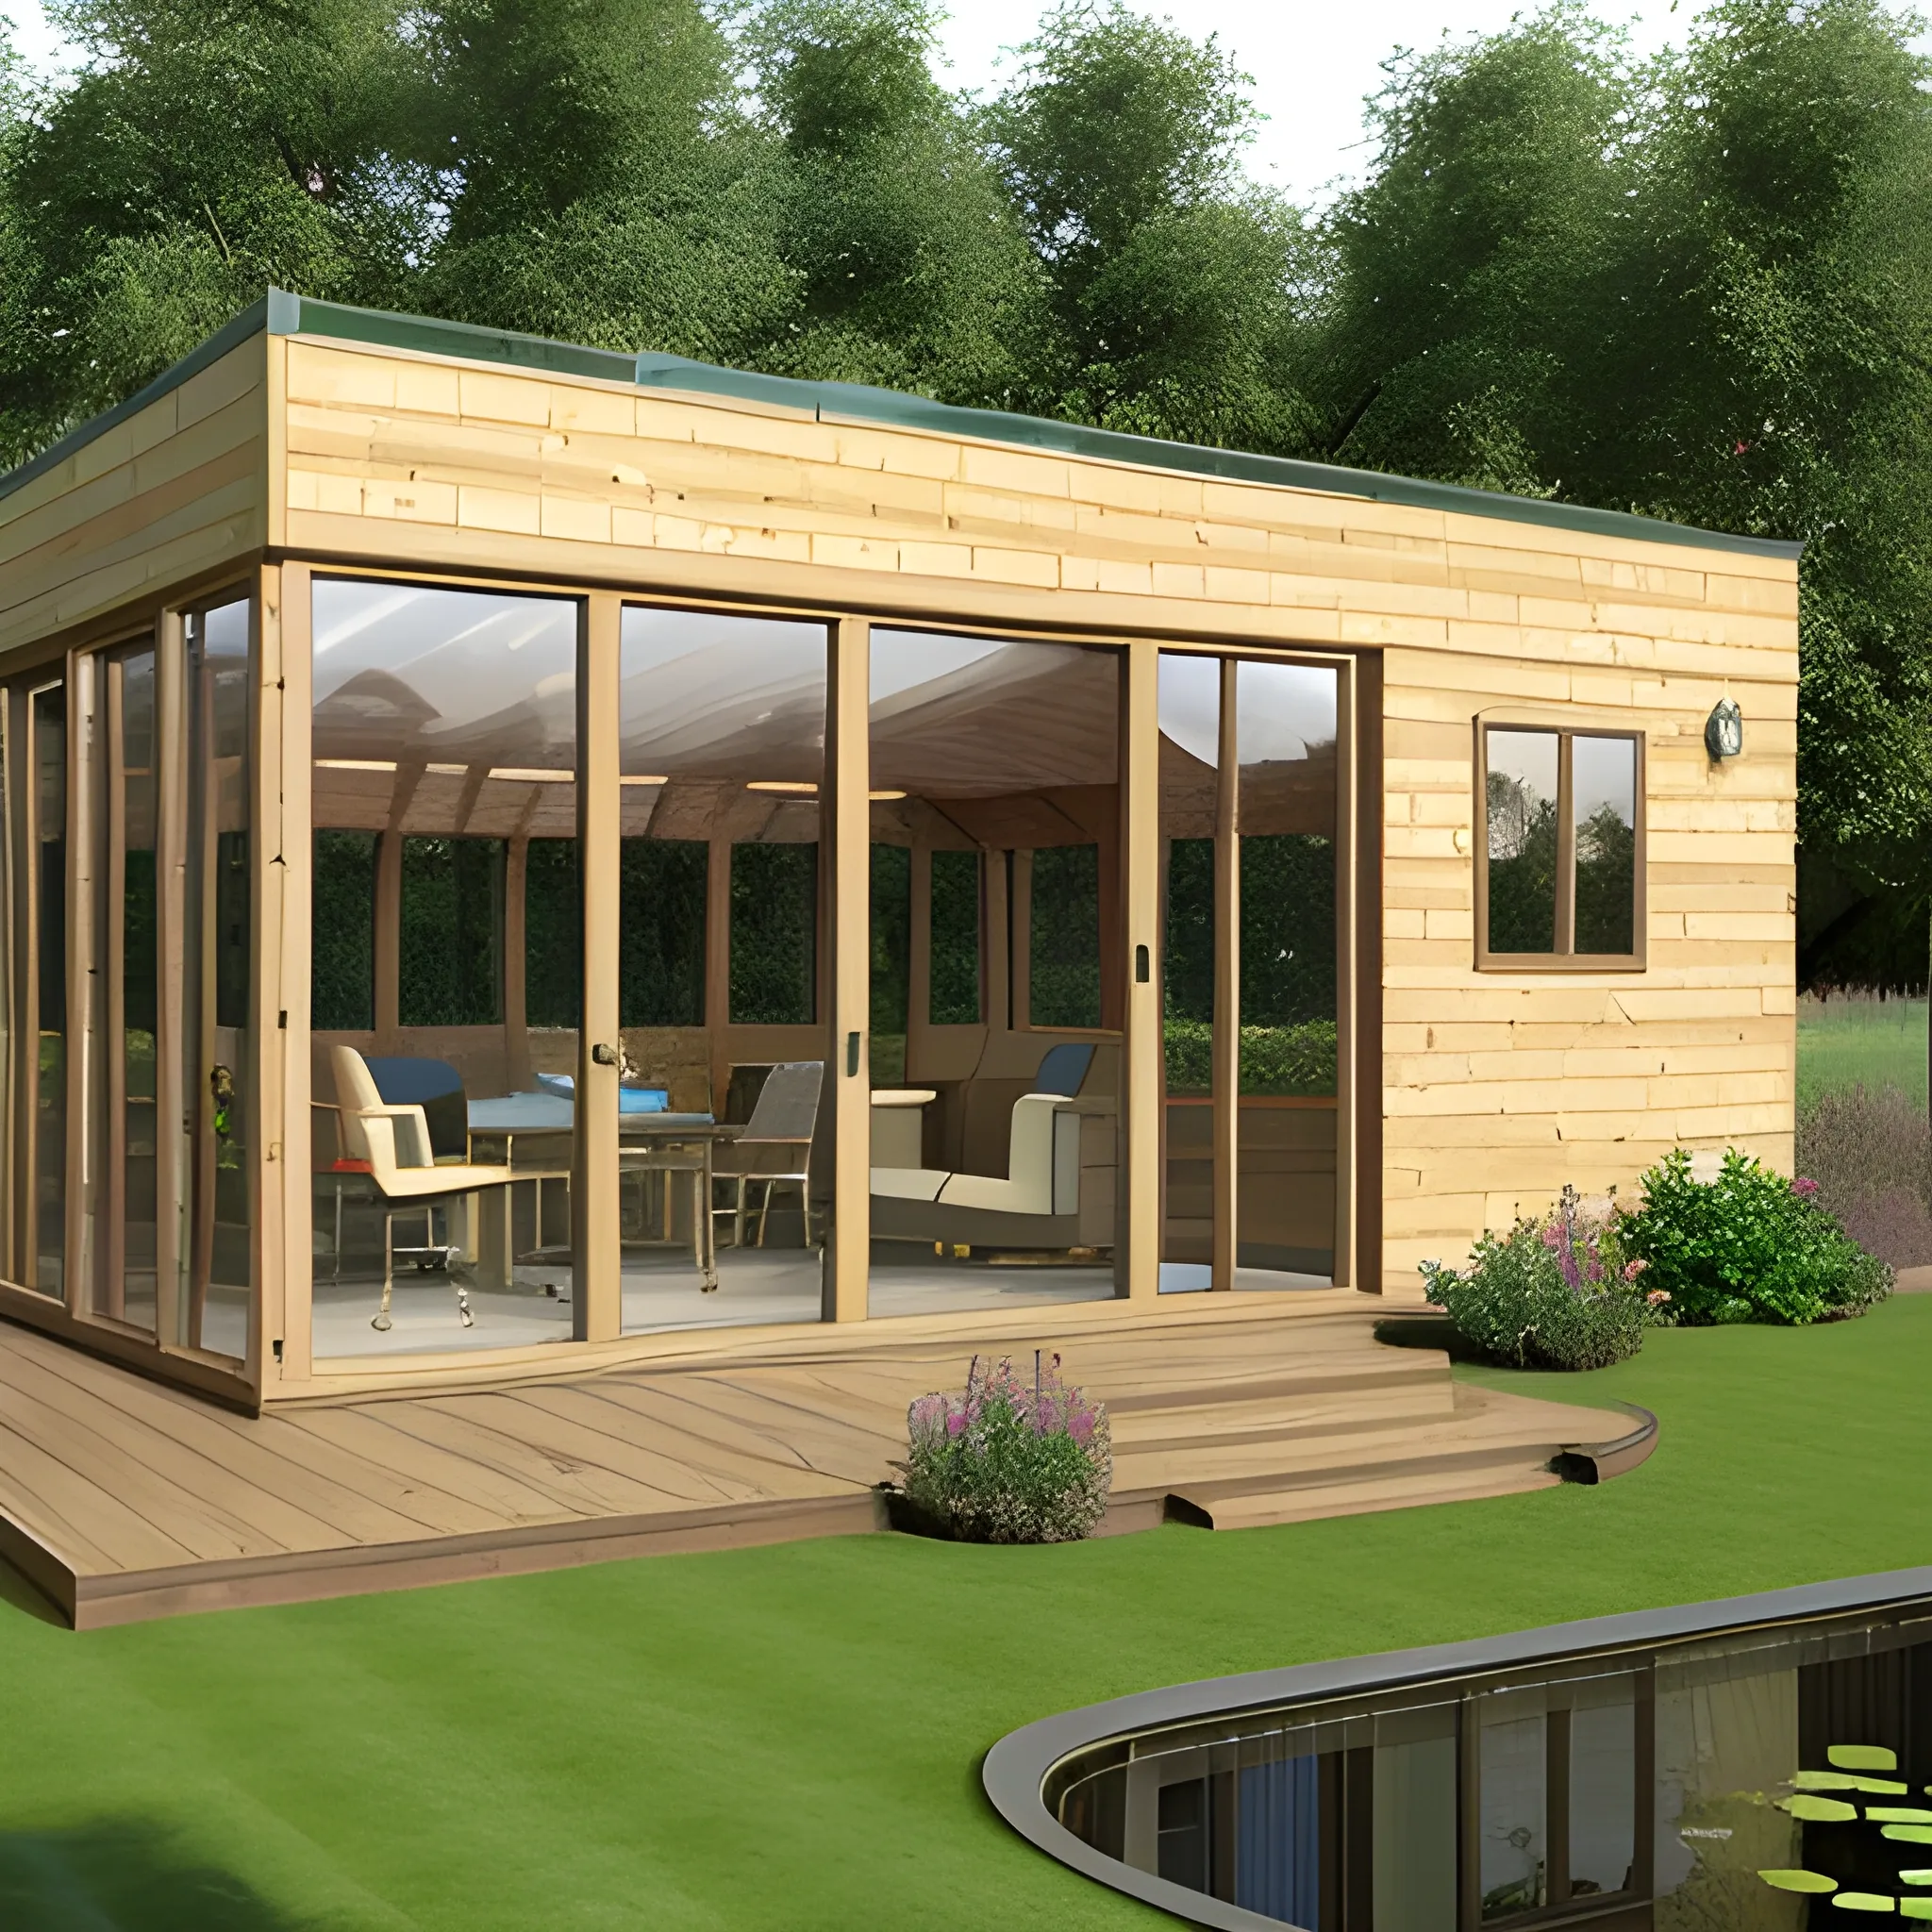 garden room, wood cladding, glass door and large windows, pond, decking, office space, 3D